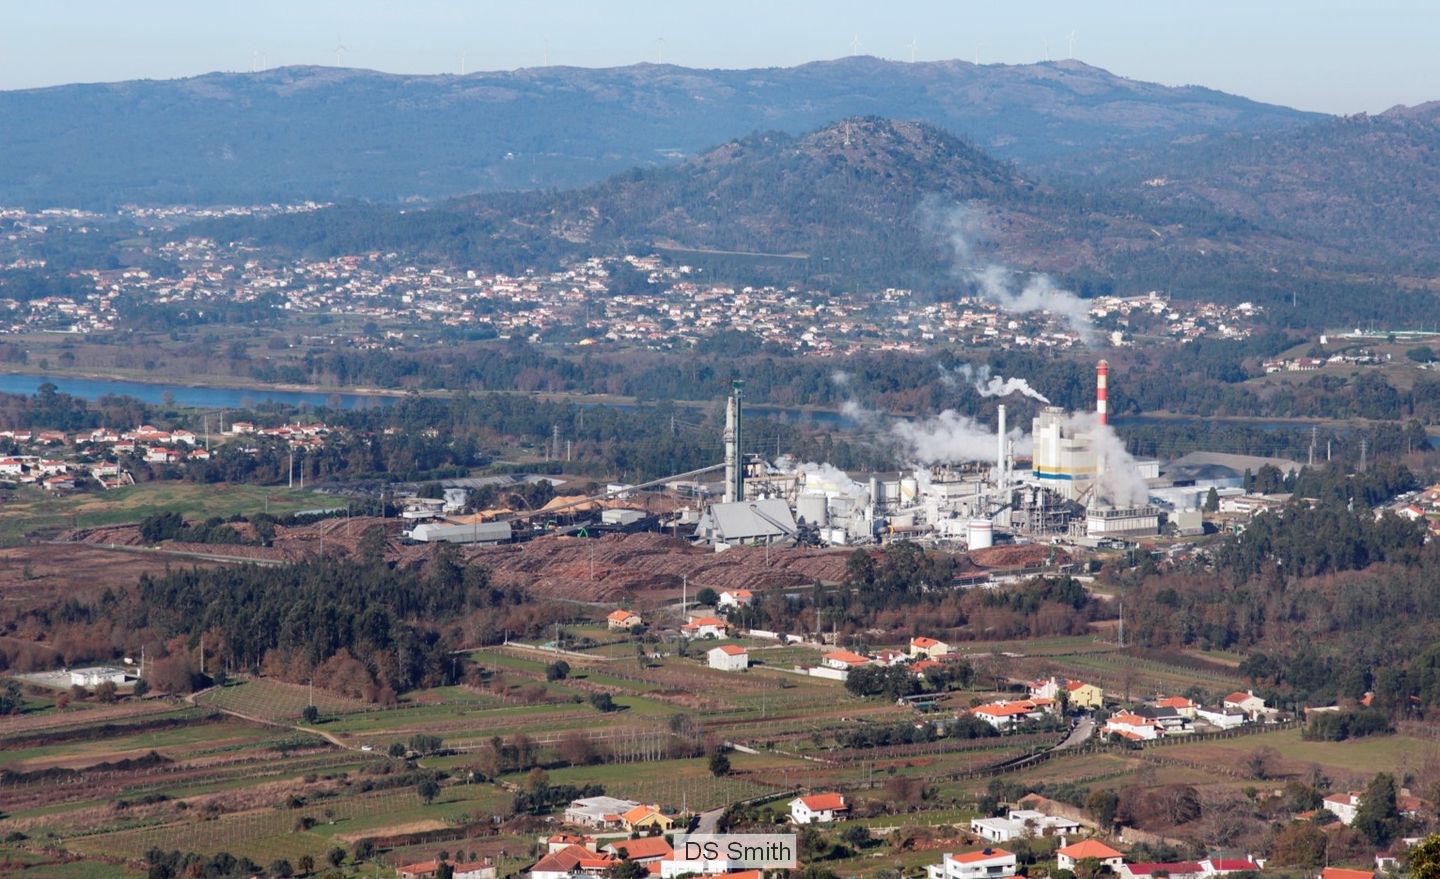 DS Smith Viana paper mill in Portugal